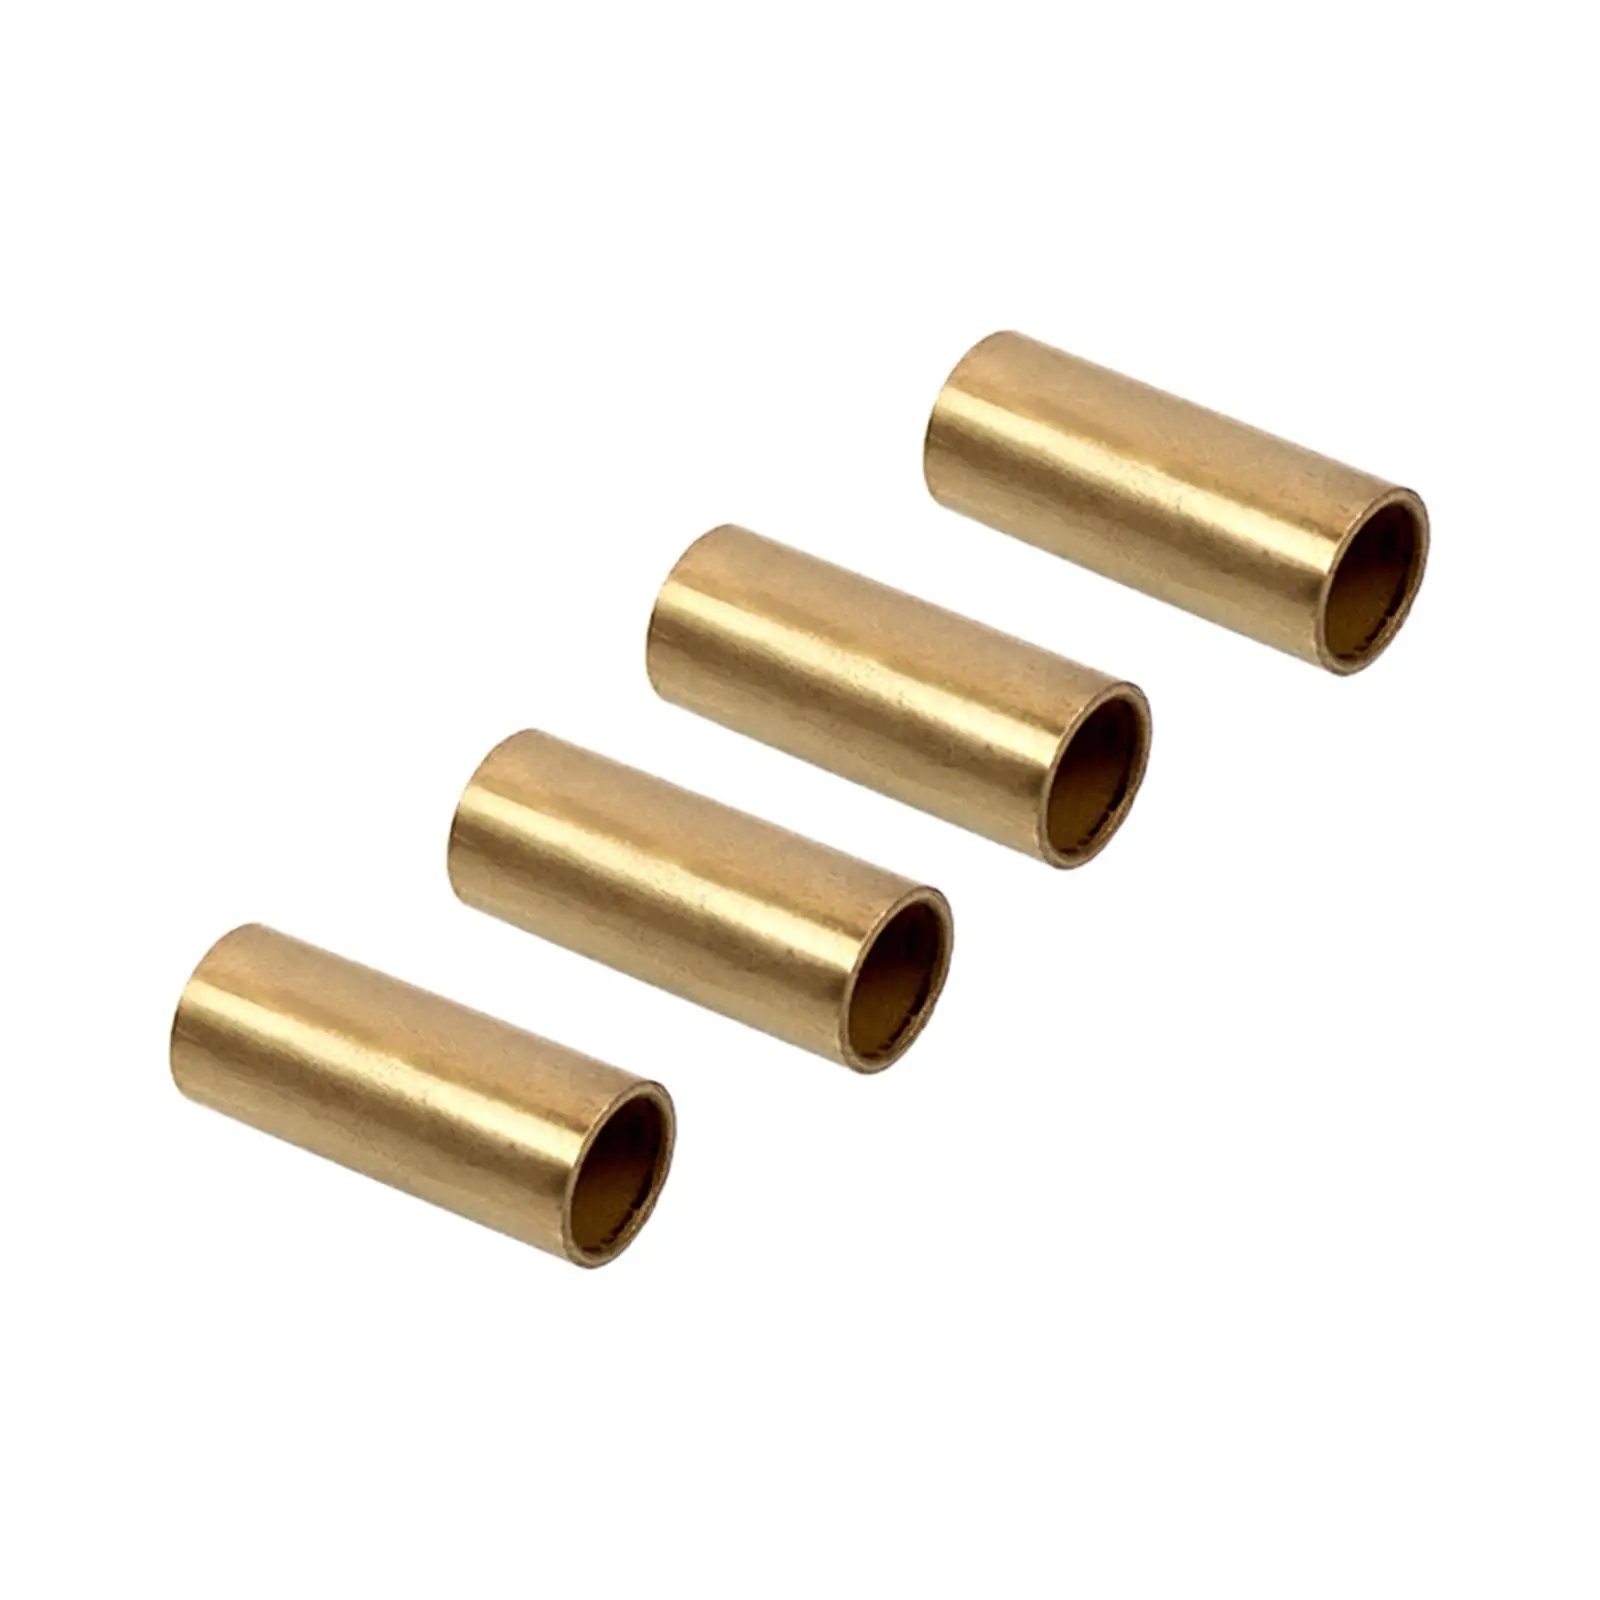 4Pcs Bronze Leaf Spring Shackle Bushings K7129100 Easy to Install Strong Direct Replaces High Performance for Dexter Axle